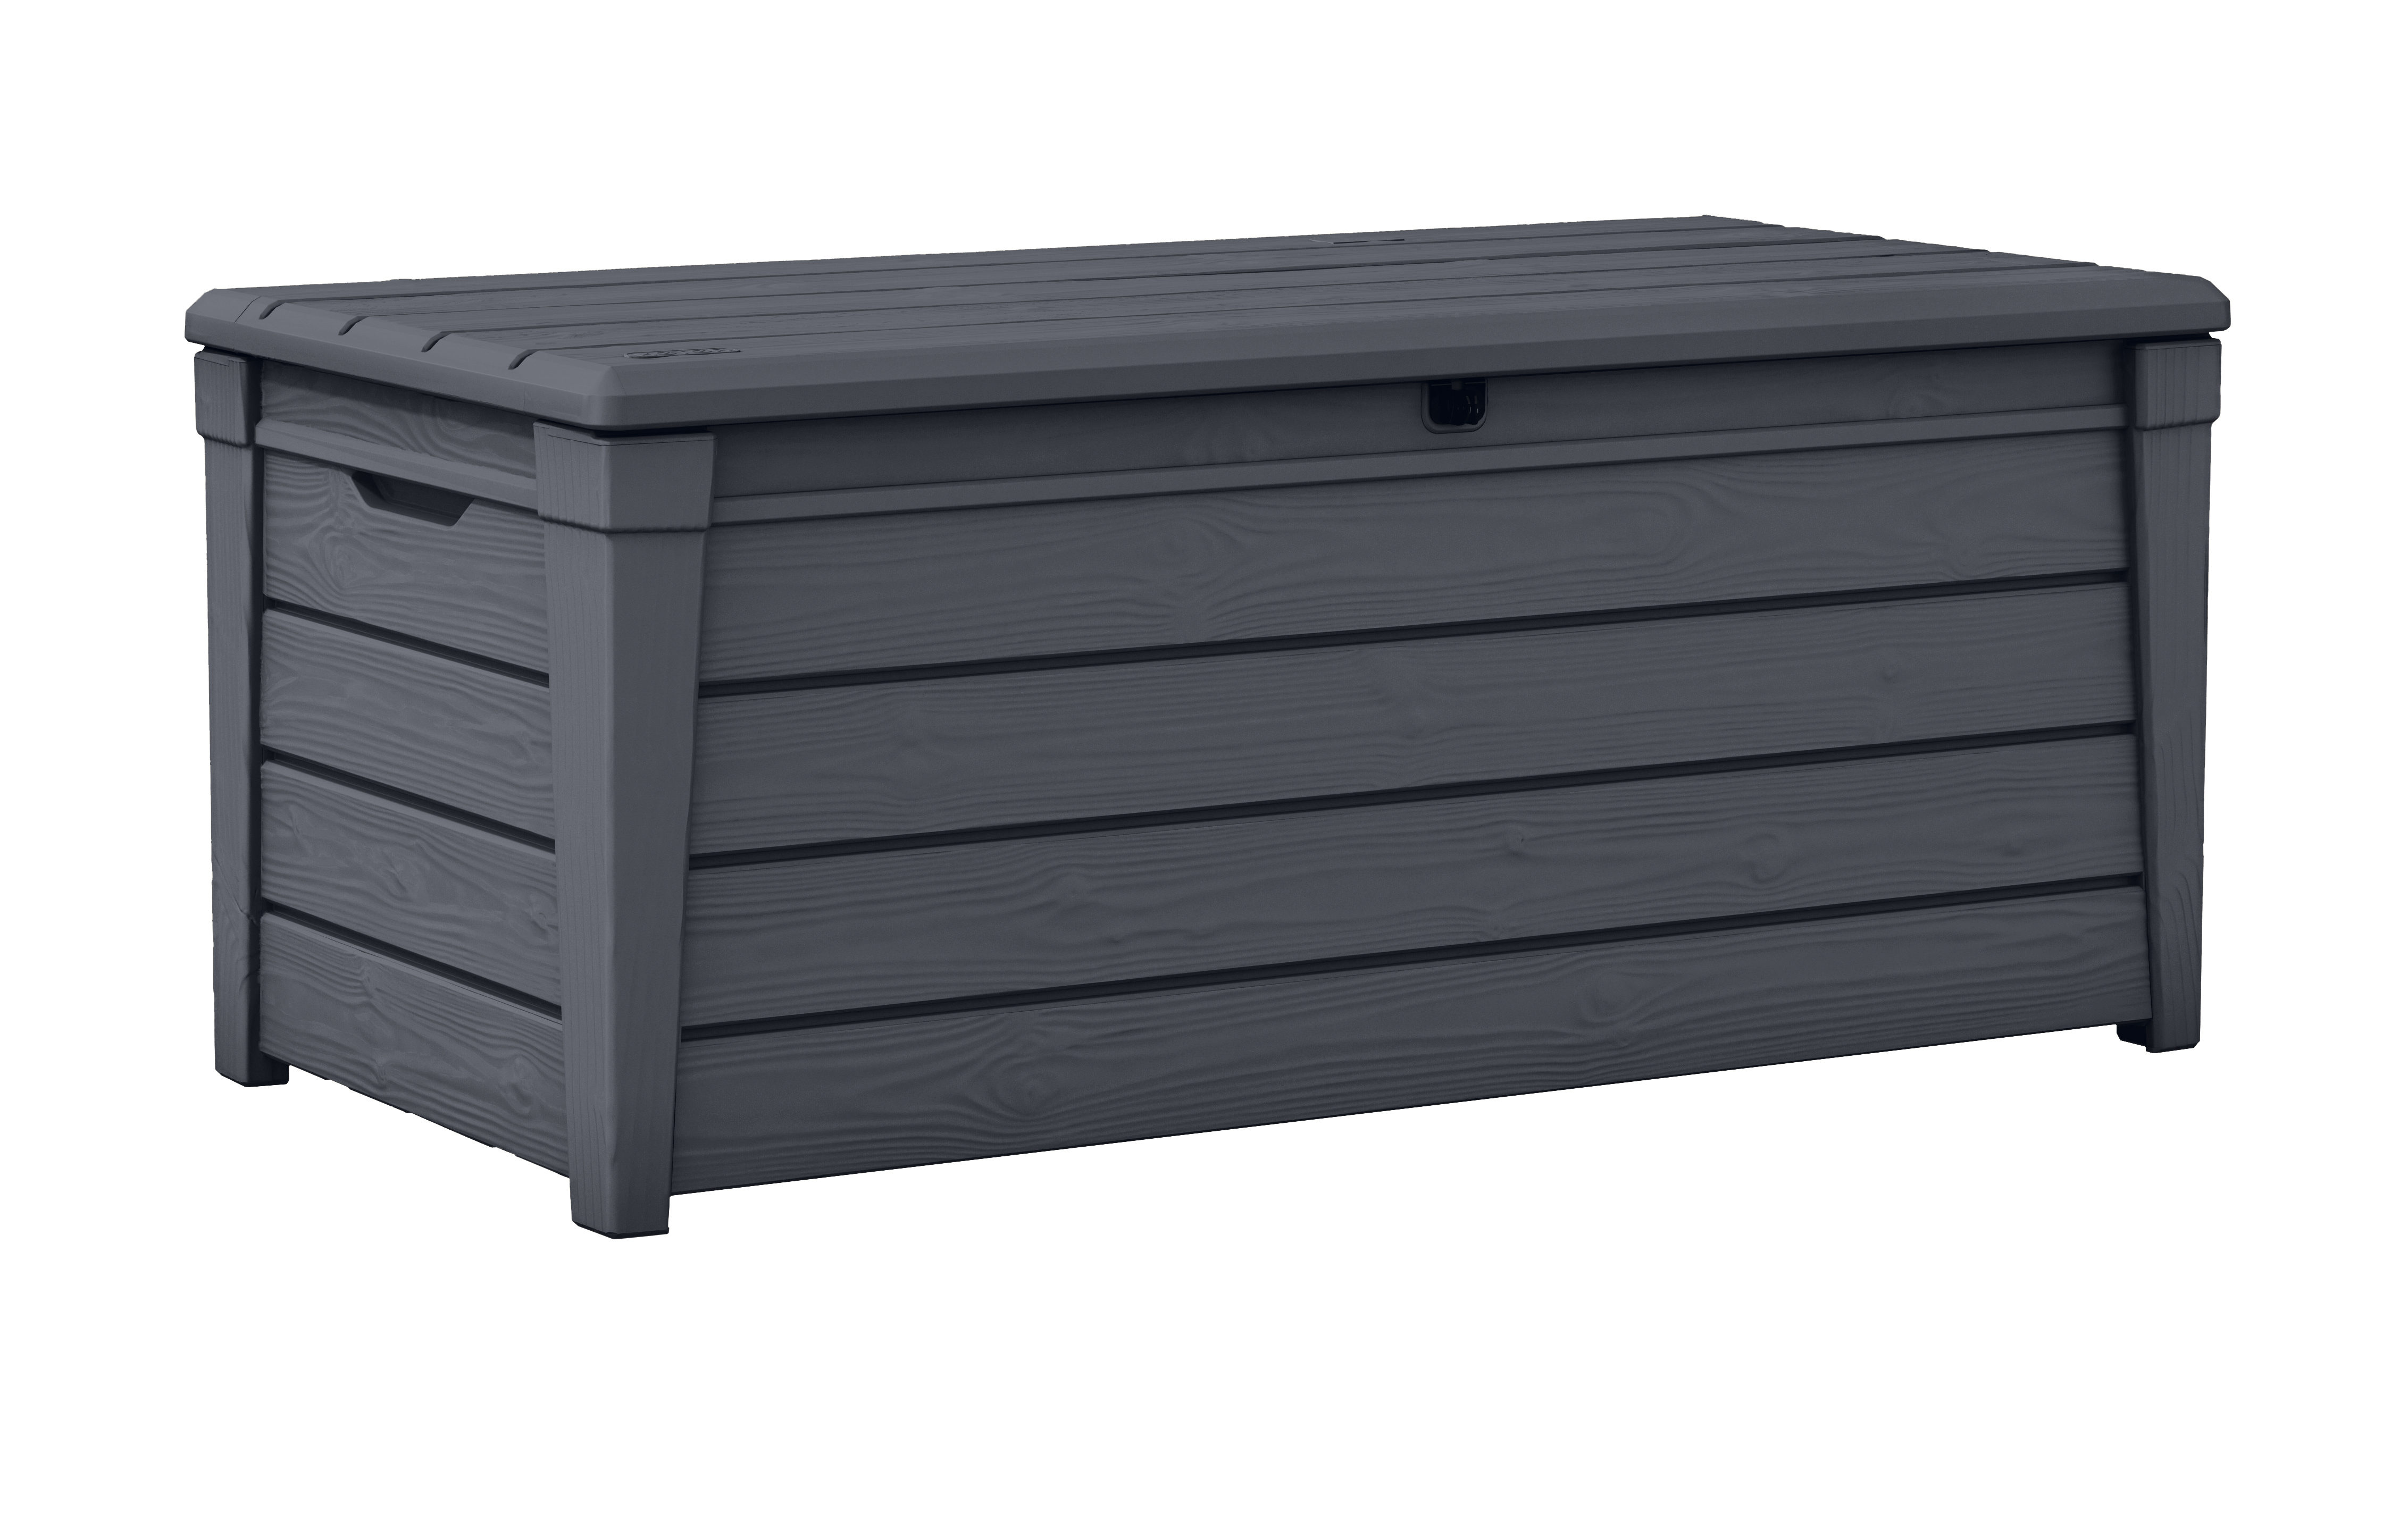 Keter Brightwood Outdoor Plastic Deck Box, All-Weather Resin Storage, 120 Gal, Anthracite Gray - image 1 of 10